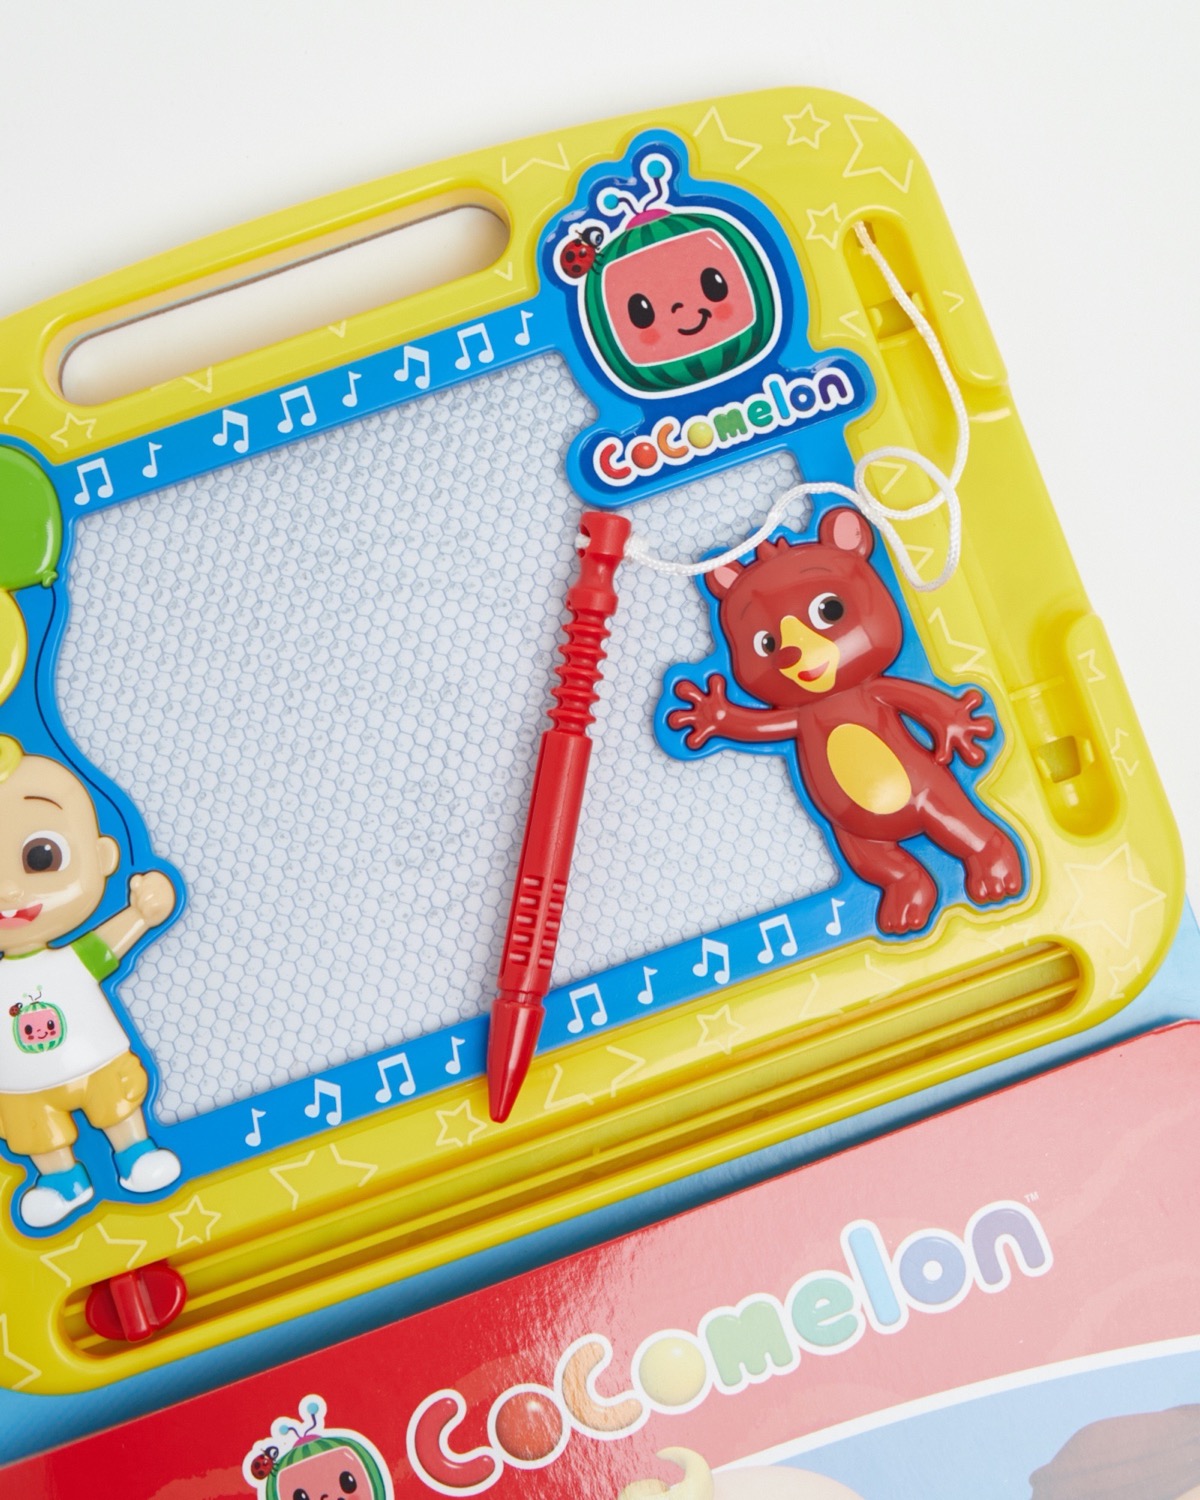 CoComelon Learning tablet